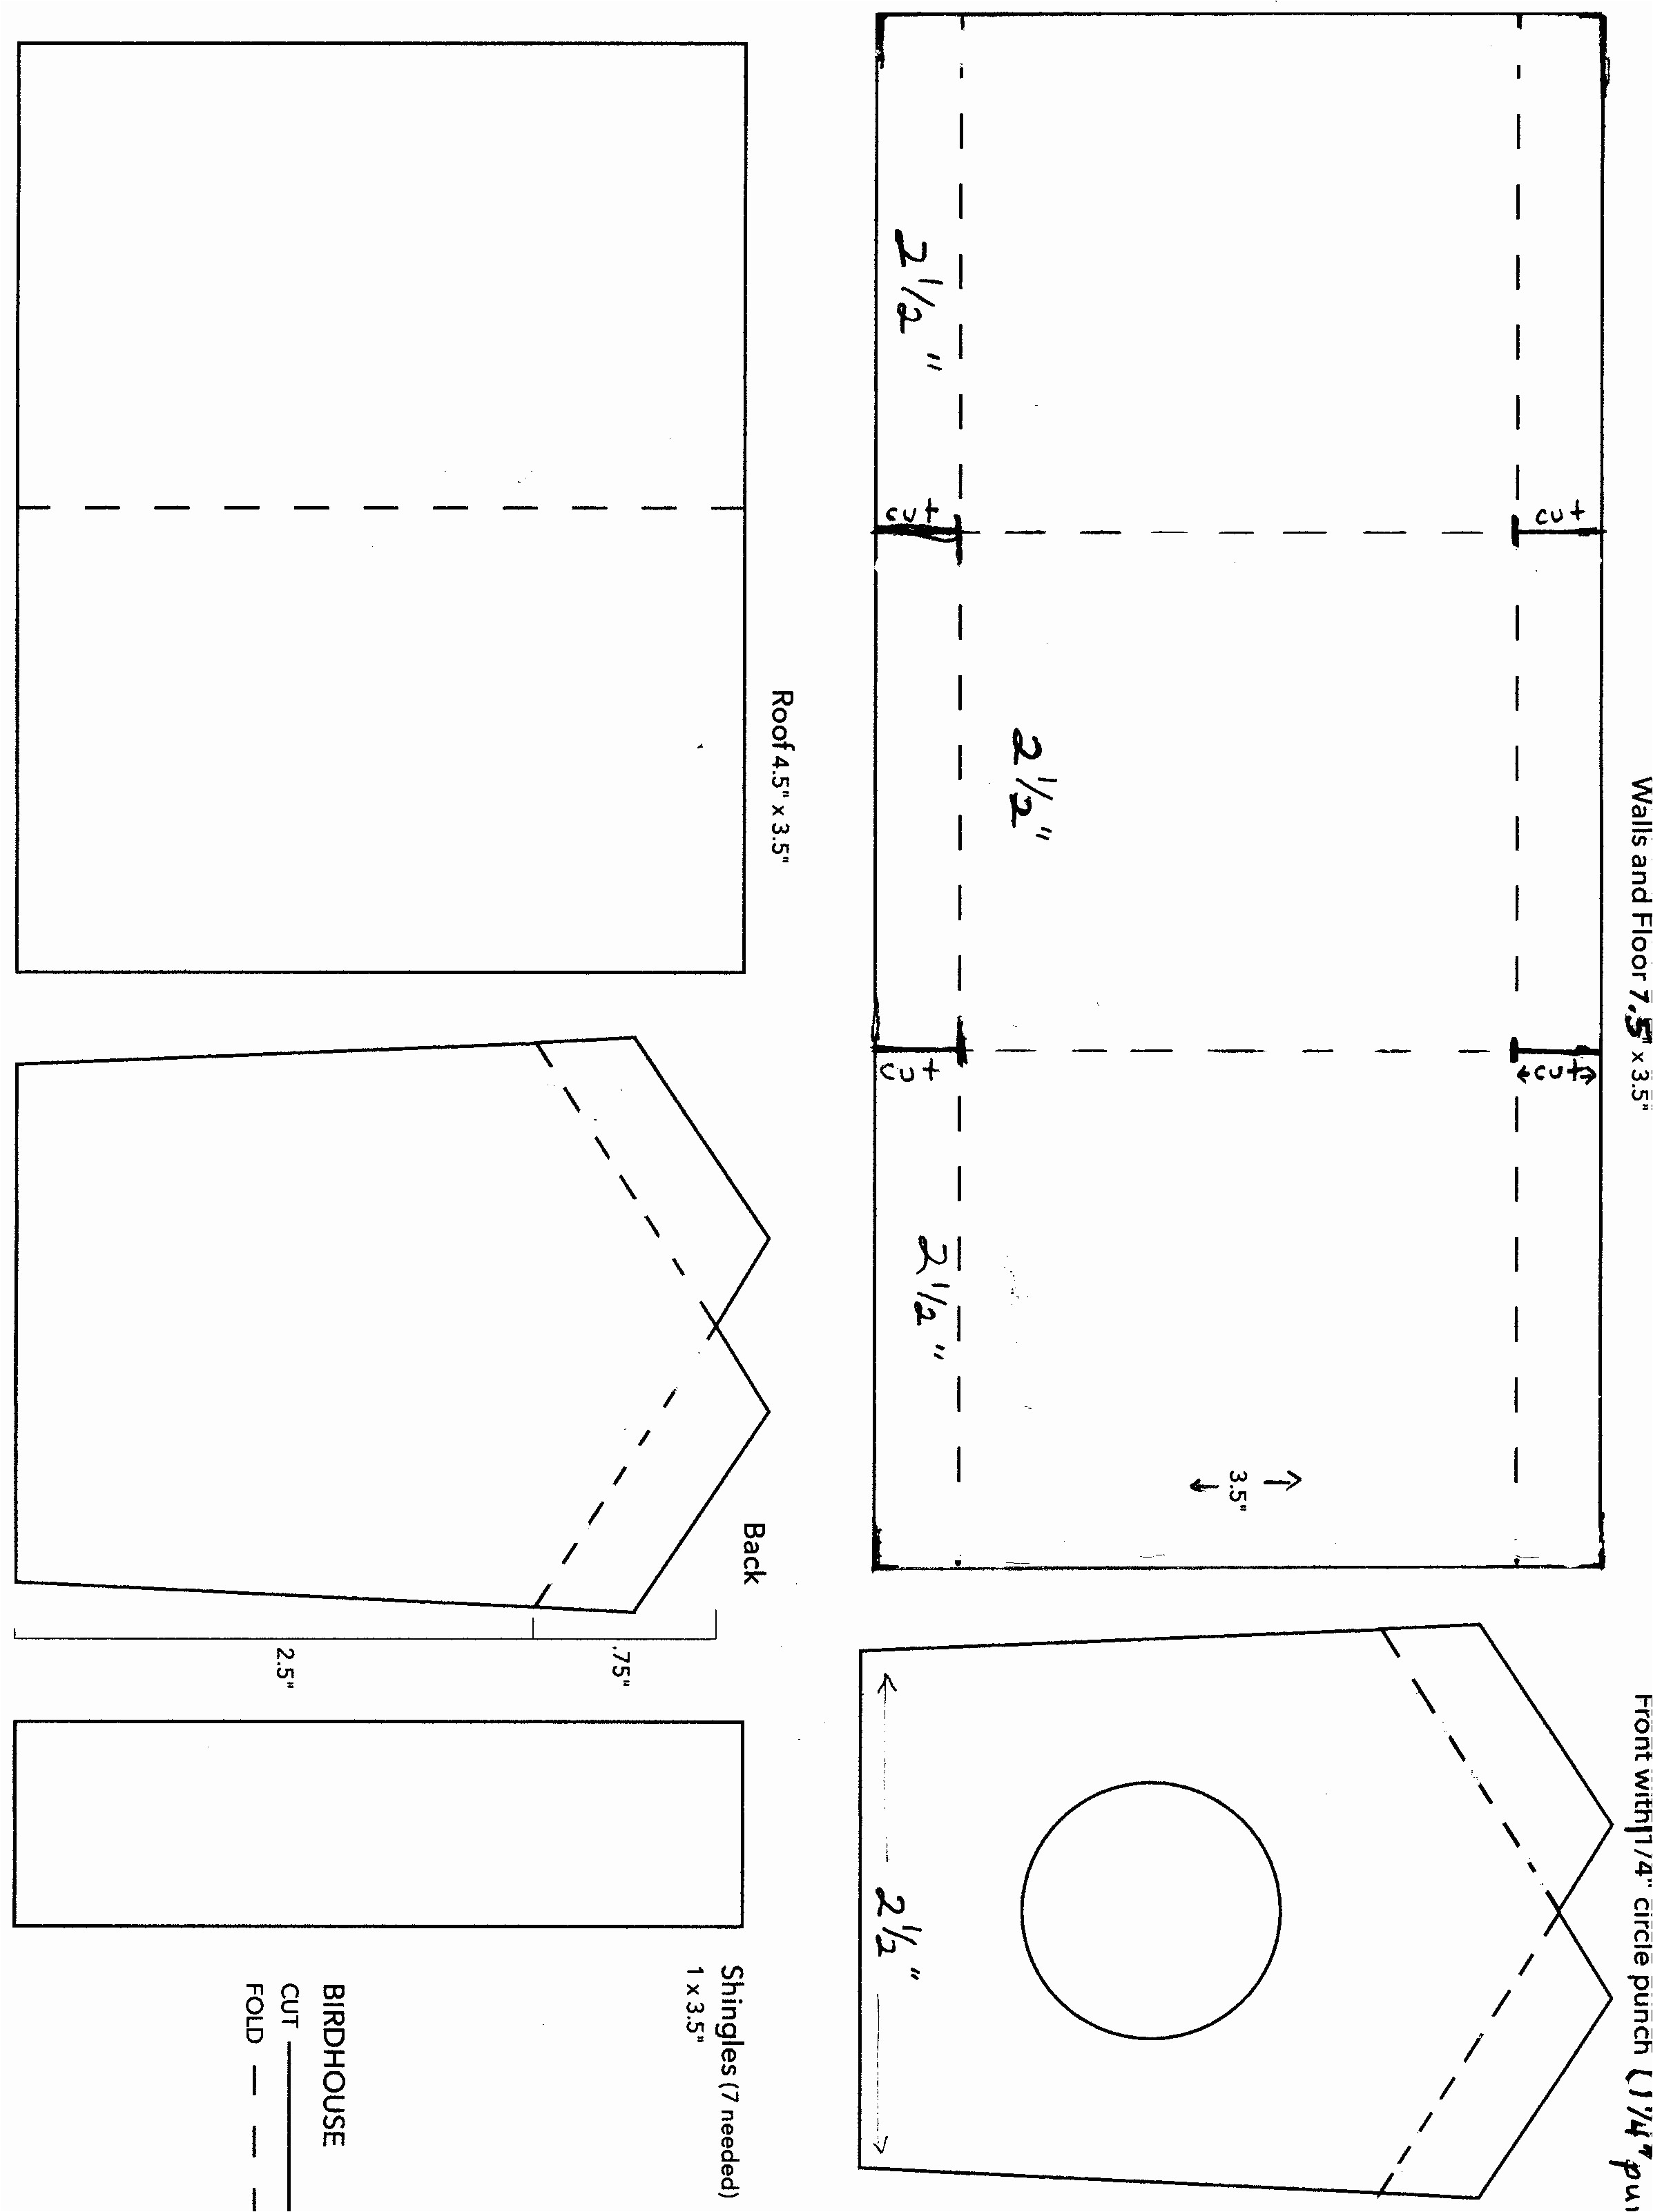 purple martin house plans hole size new 60 awesome s bird house plans free images of